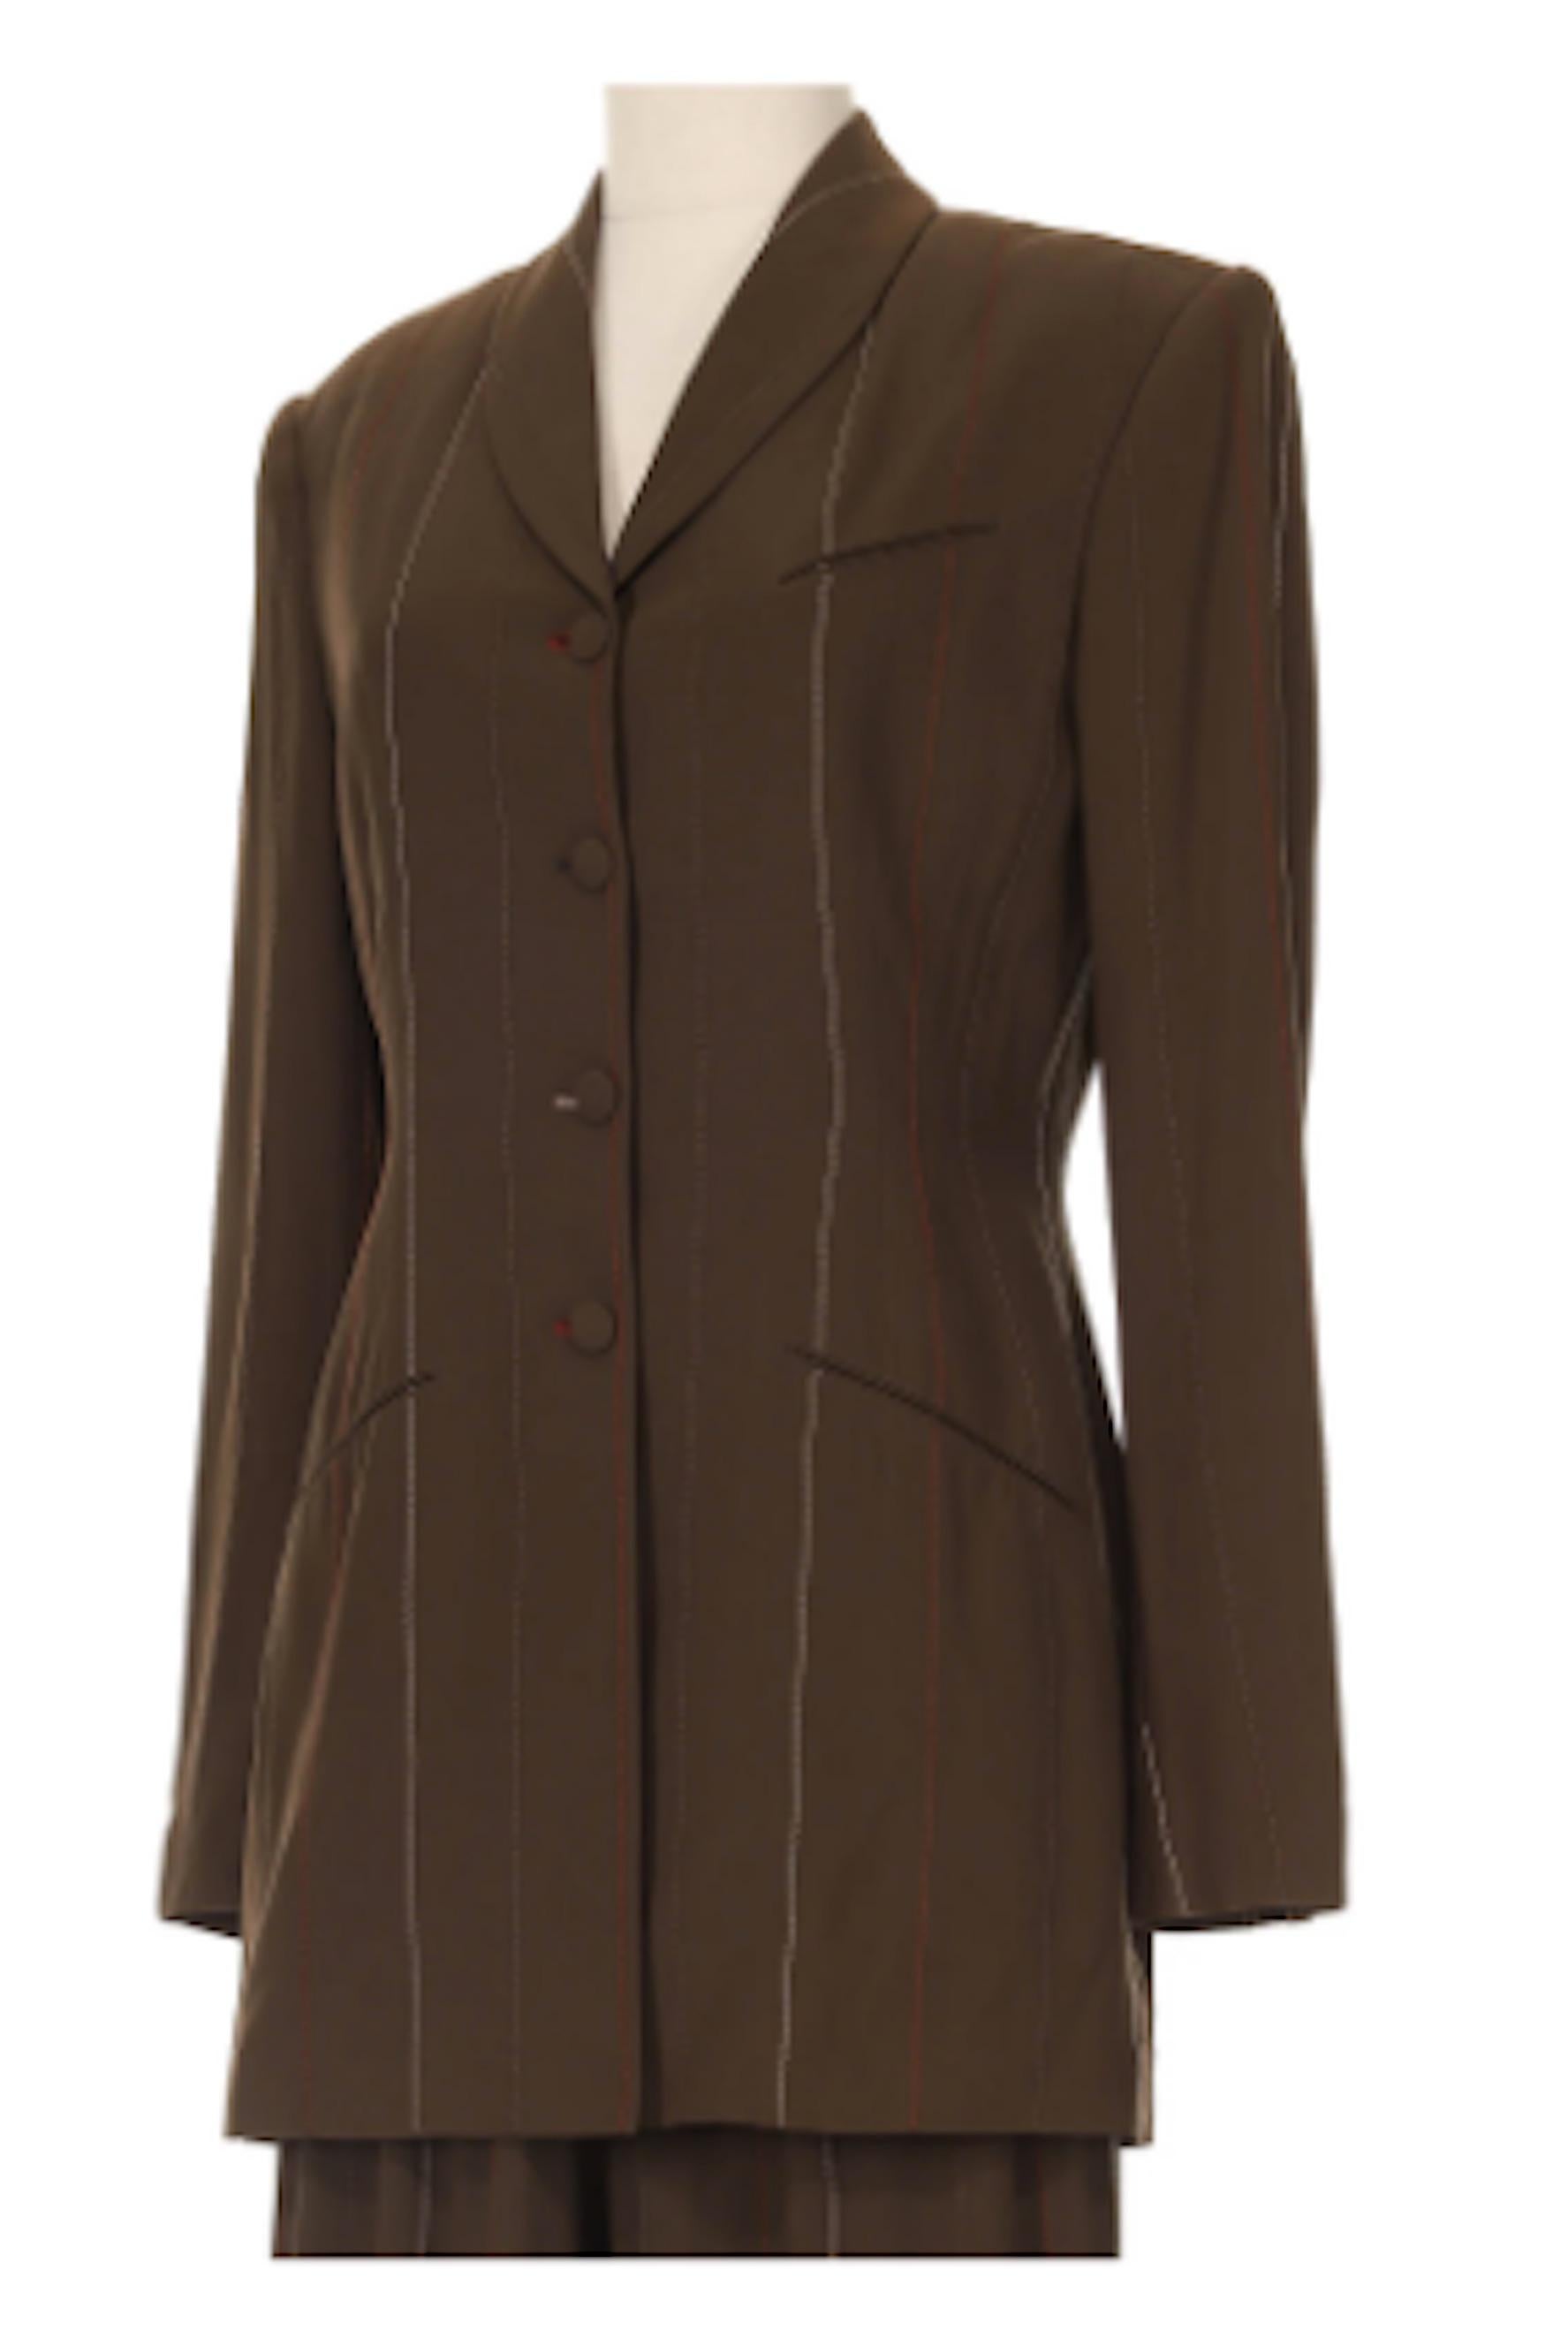  Richard Tyler Stitched Pinstripe Brown Pantsuit Circa 1990's.Oversized yet tailored blazer jacket with four front buttons and matching pants with front zipper closure. Embellished with red, brown and light brown pinstripe stitching.
- Estimated